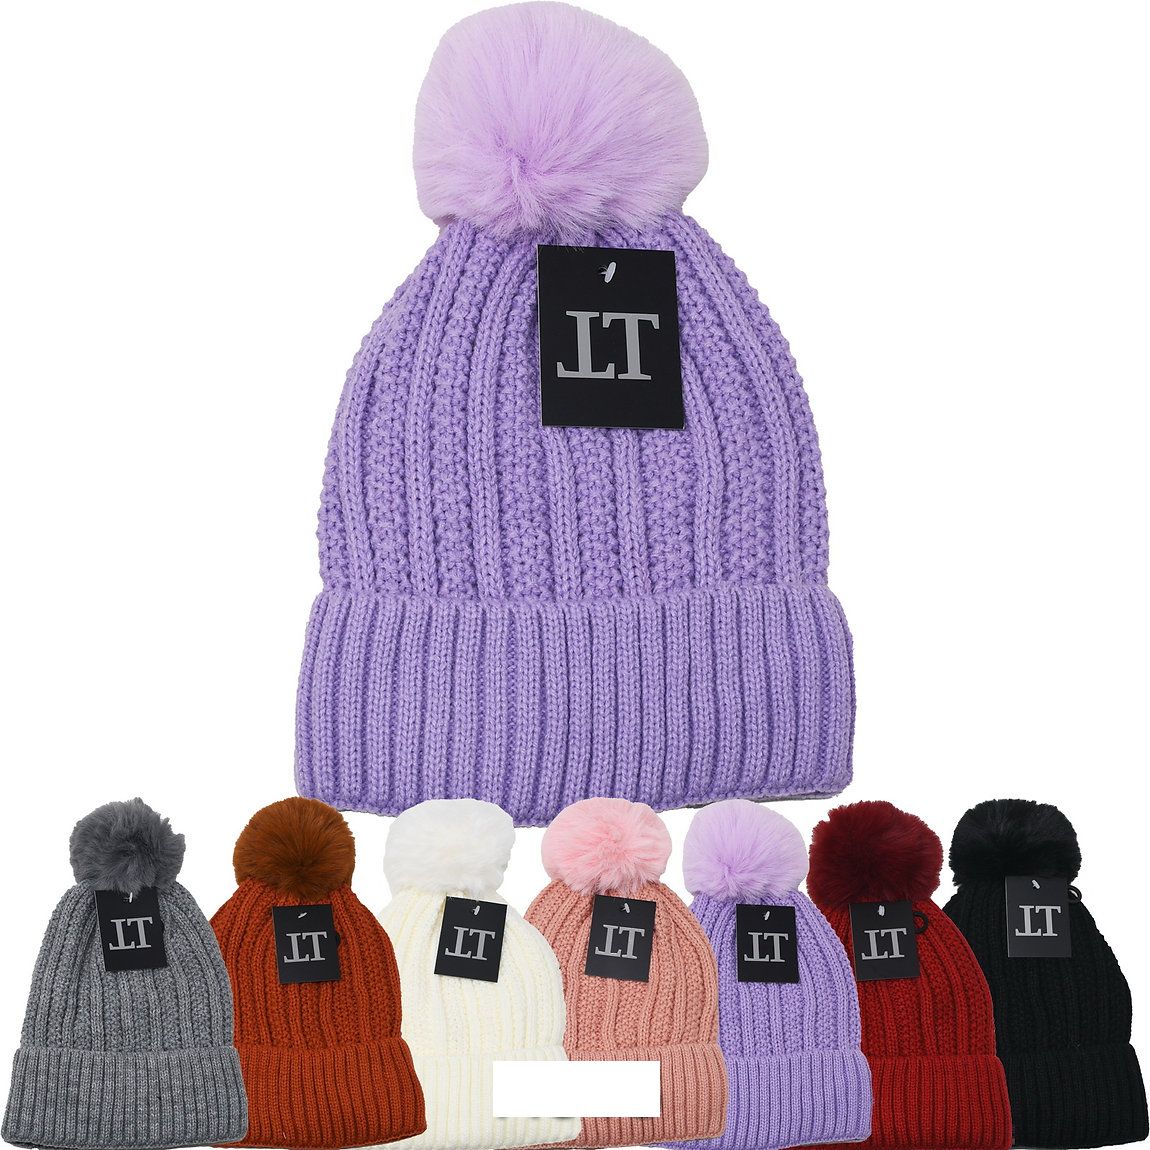 12 Pieces of Women's Winter Fur Lining Love Style Knitted Hats With Pompoms In Assorted Colors